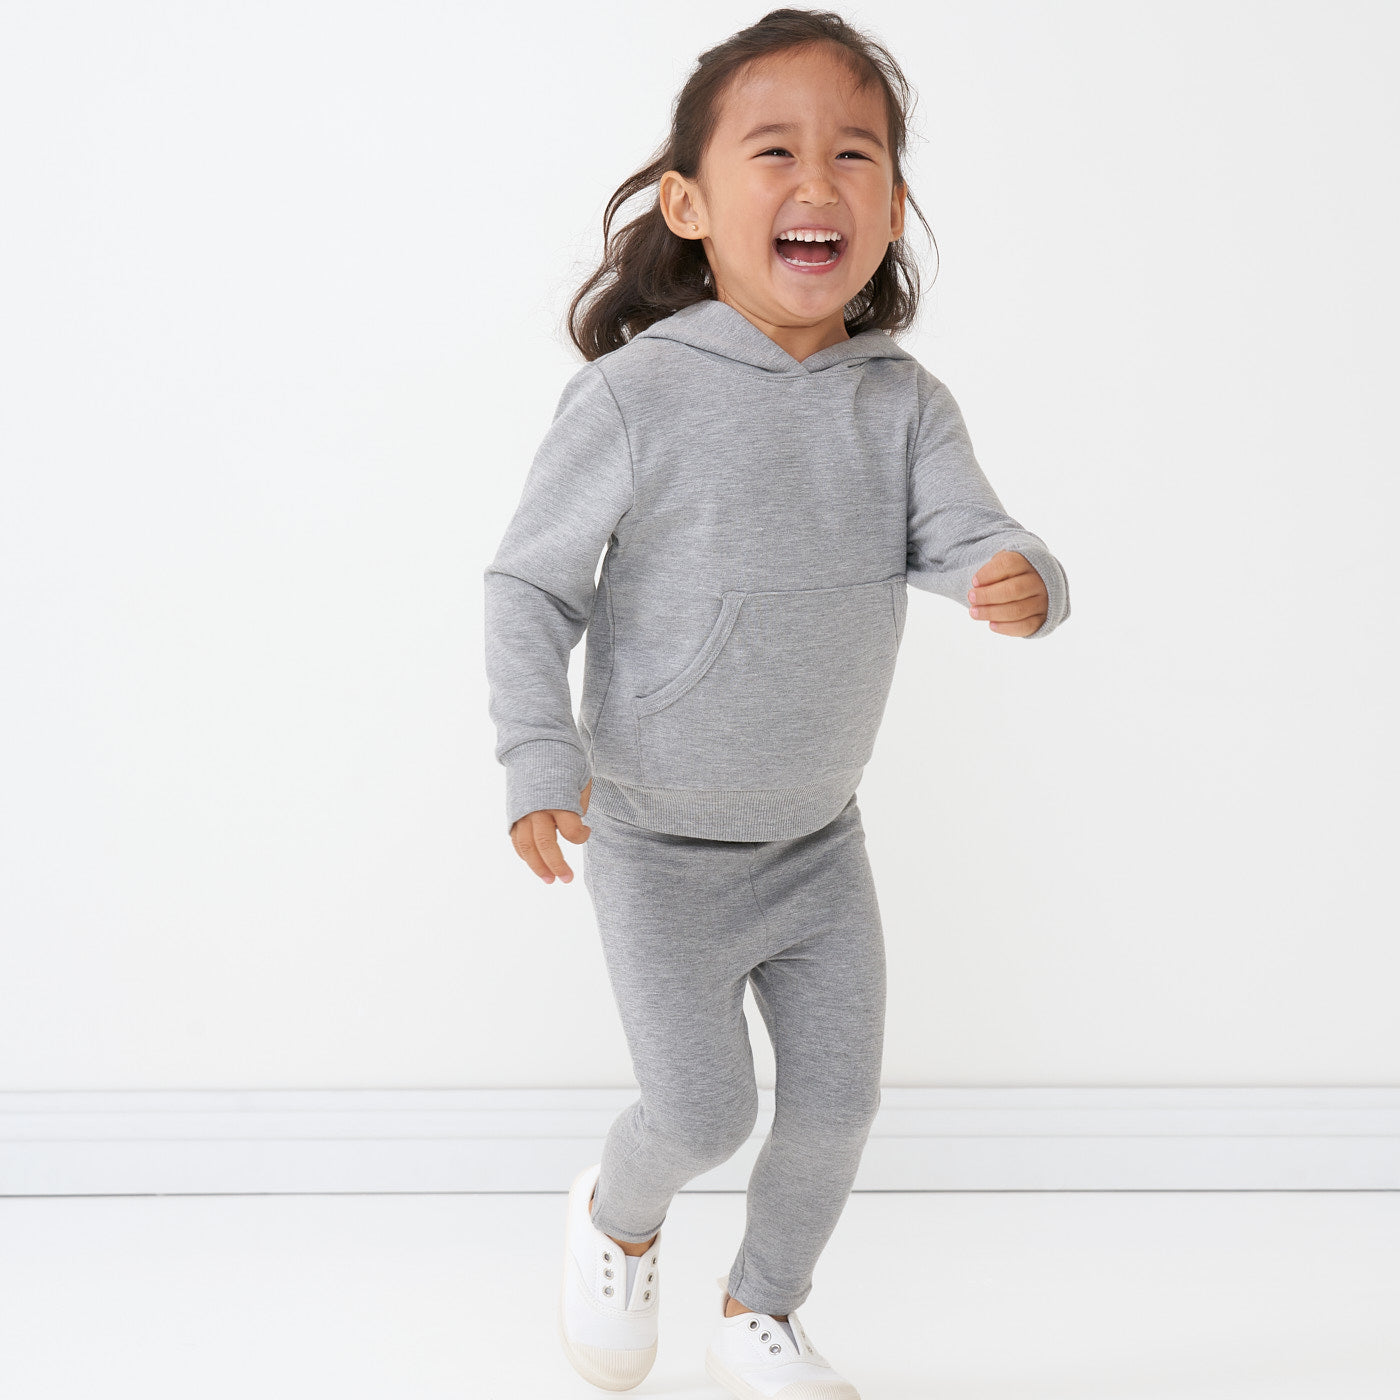 Child wearing a Heather Gray pullover hoodie paired with Heather Gray cozy leggings